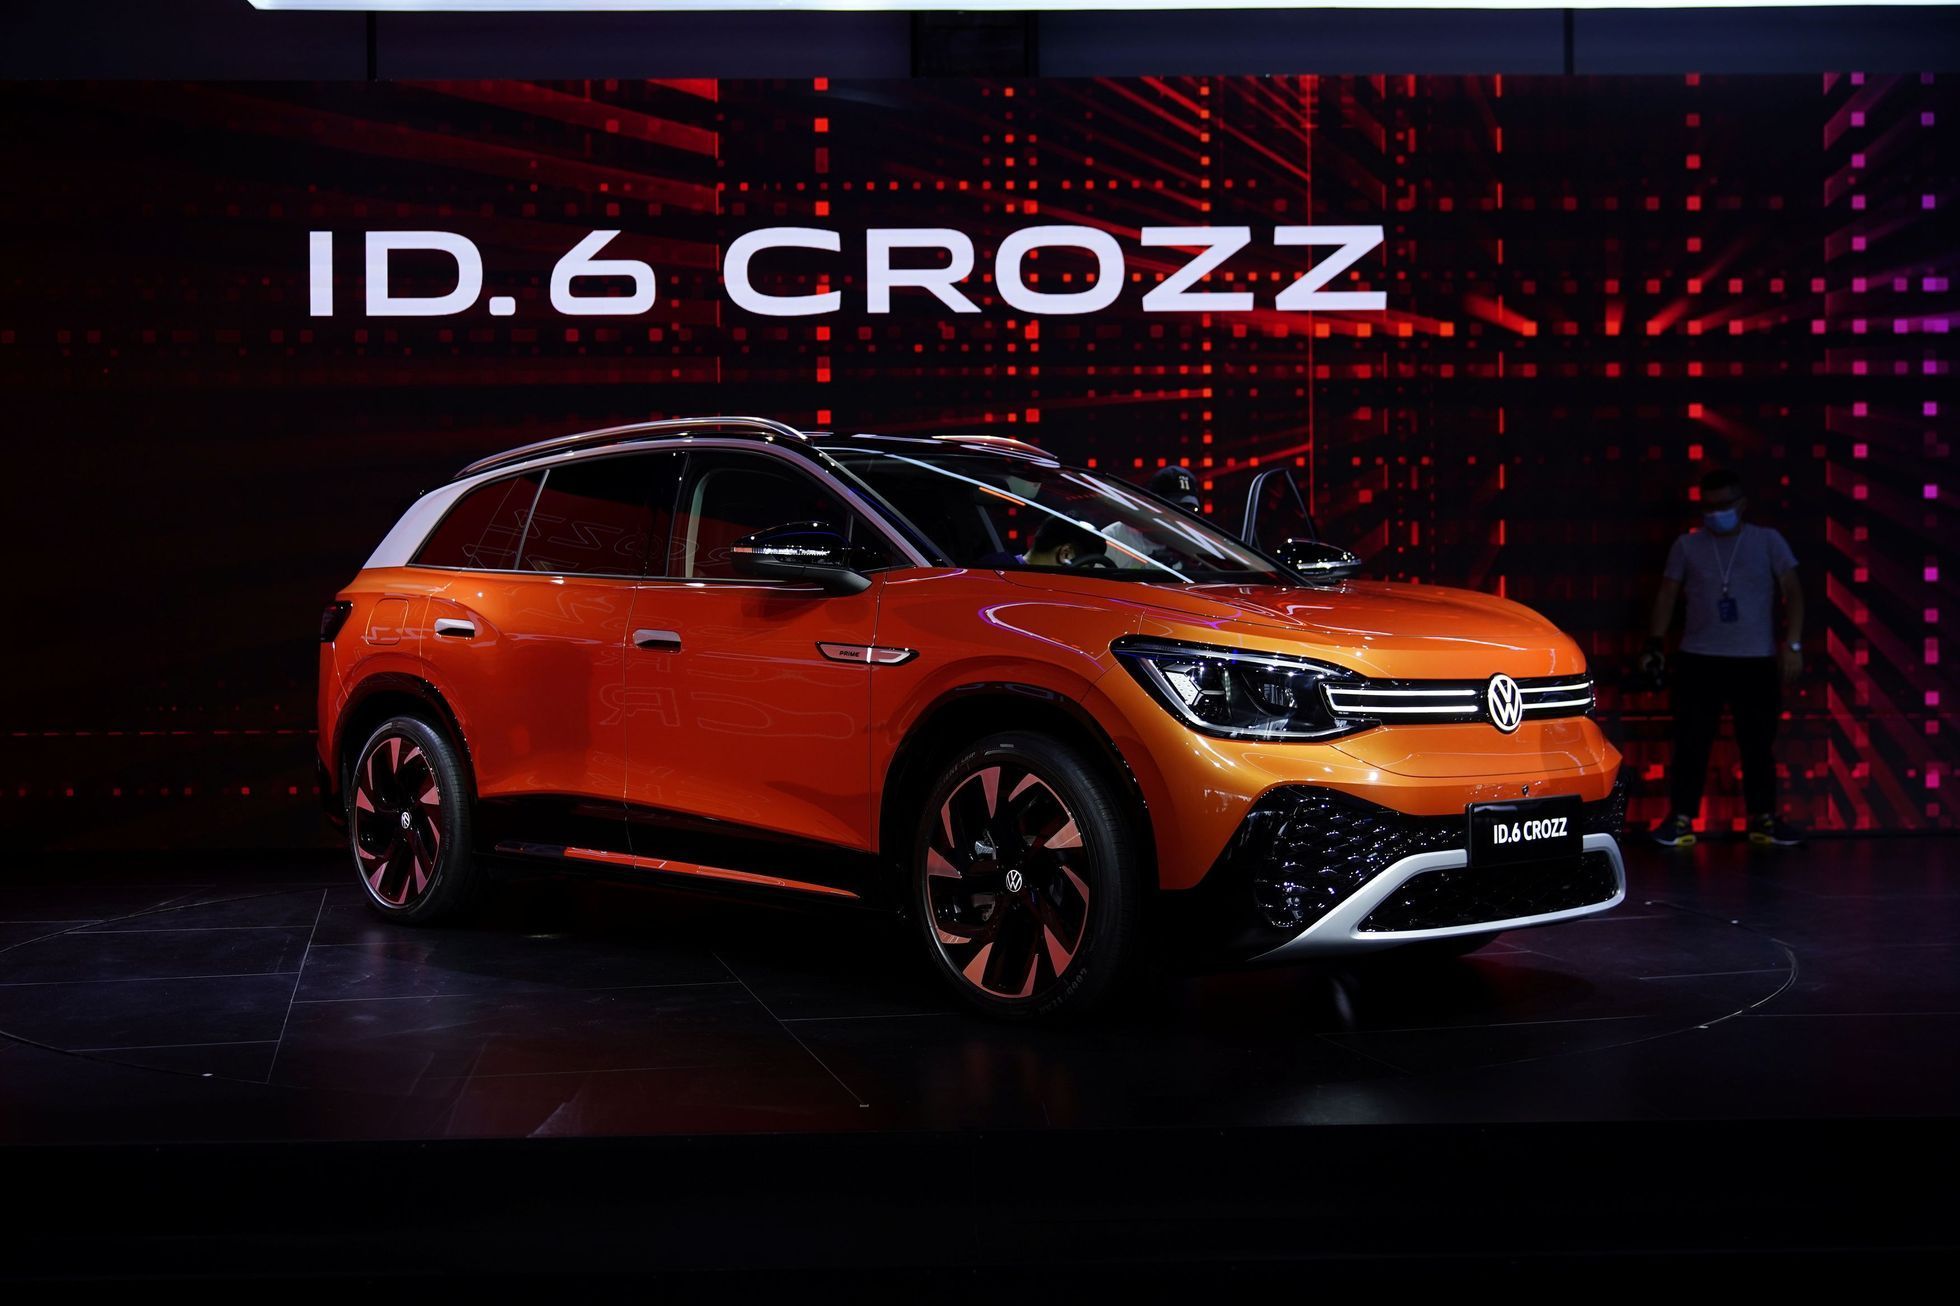 A Volkswagen ID.6 CROZZ is displayed ahead of the Shanghai Auto Show, in Shanghai